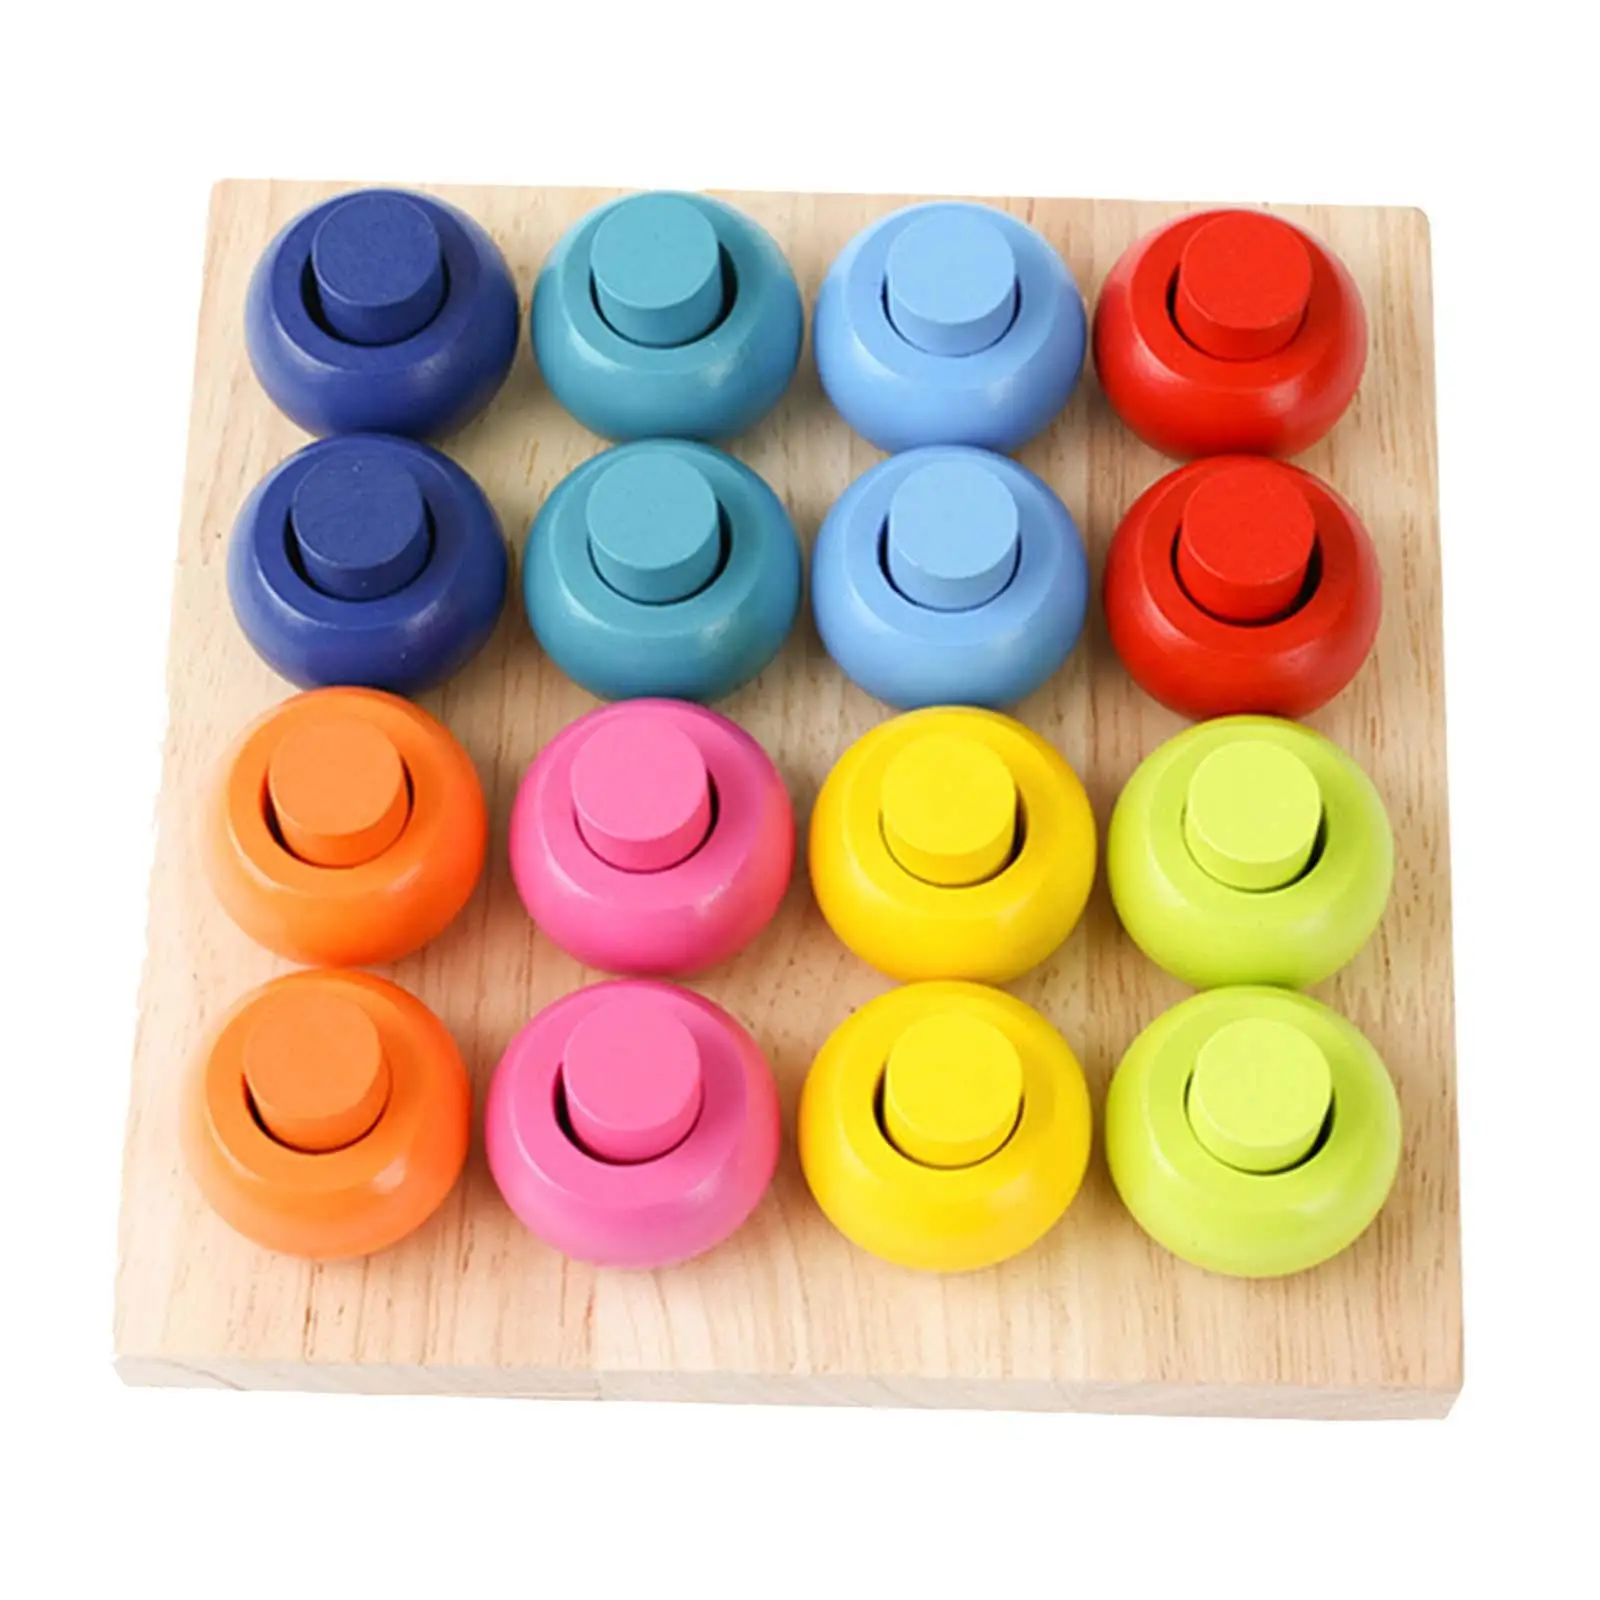 Pegs rings Stacker Educational Cognitive Colour Sorting Puzzle Baby Preschool